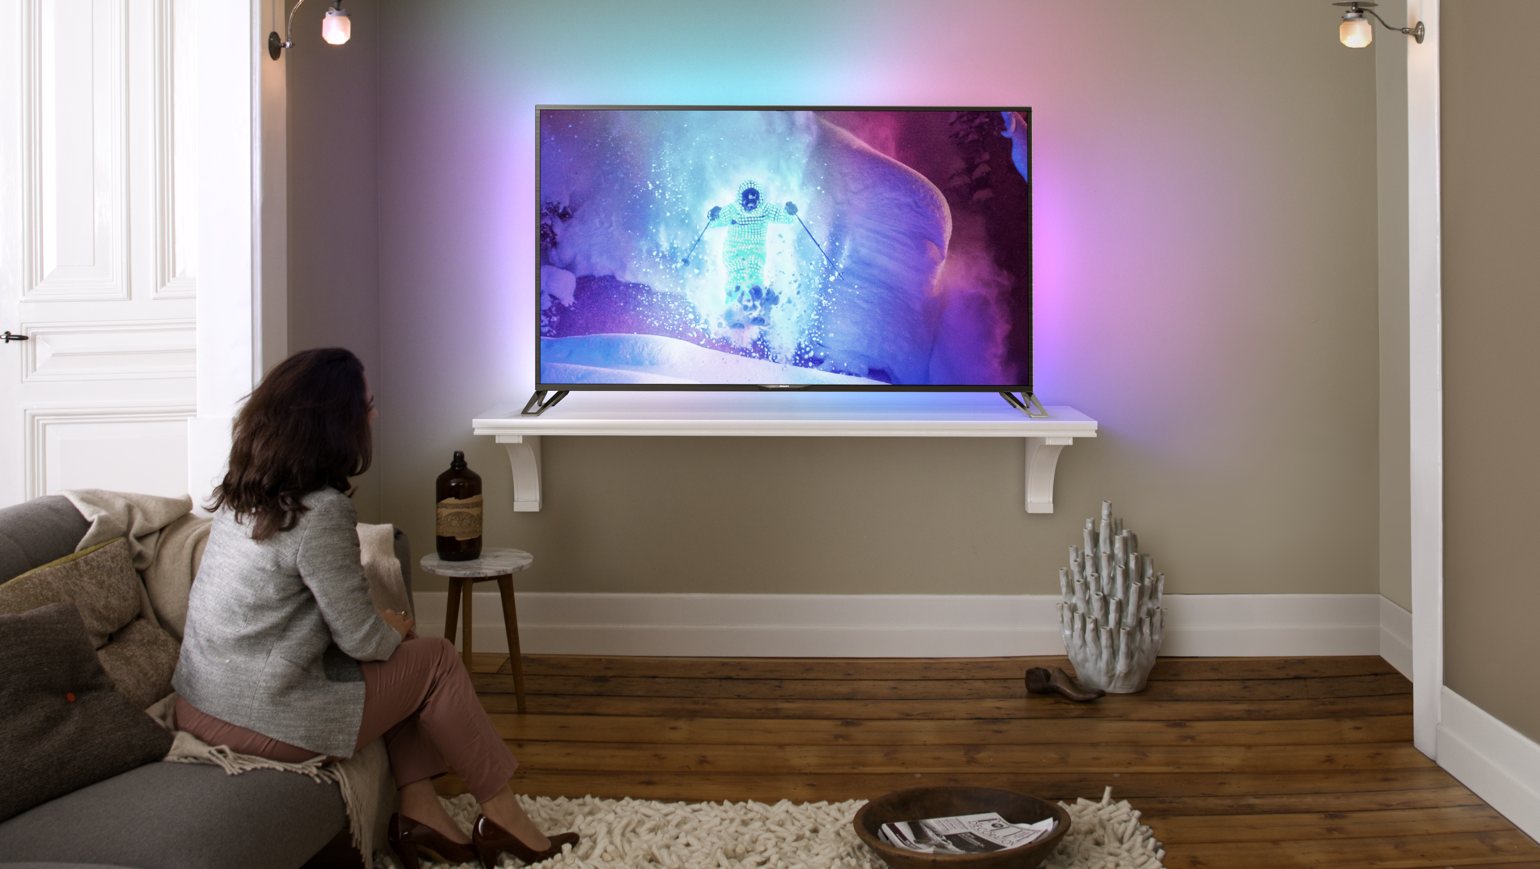 Philips 65PUS9809 UHD Ambilight TV powered by Android